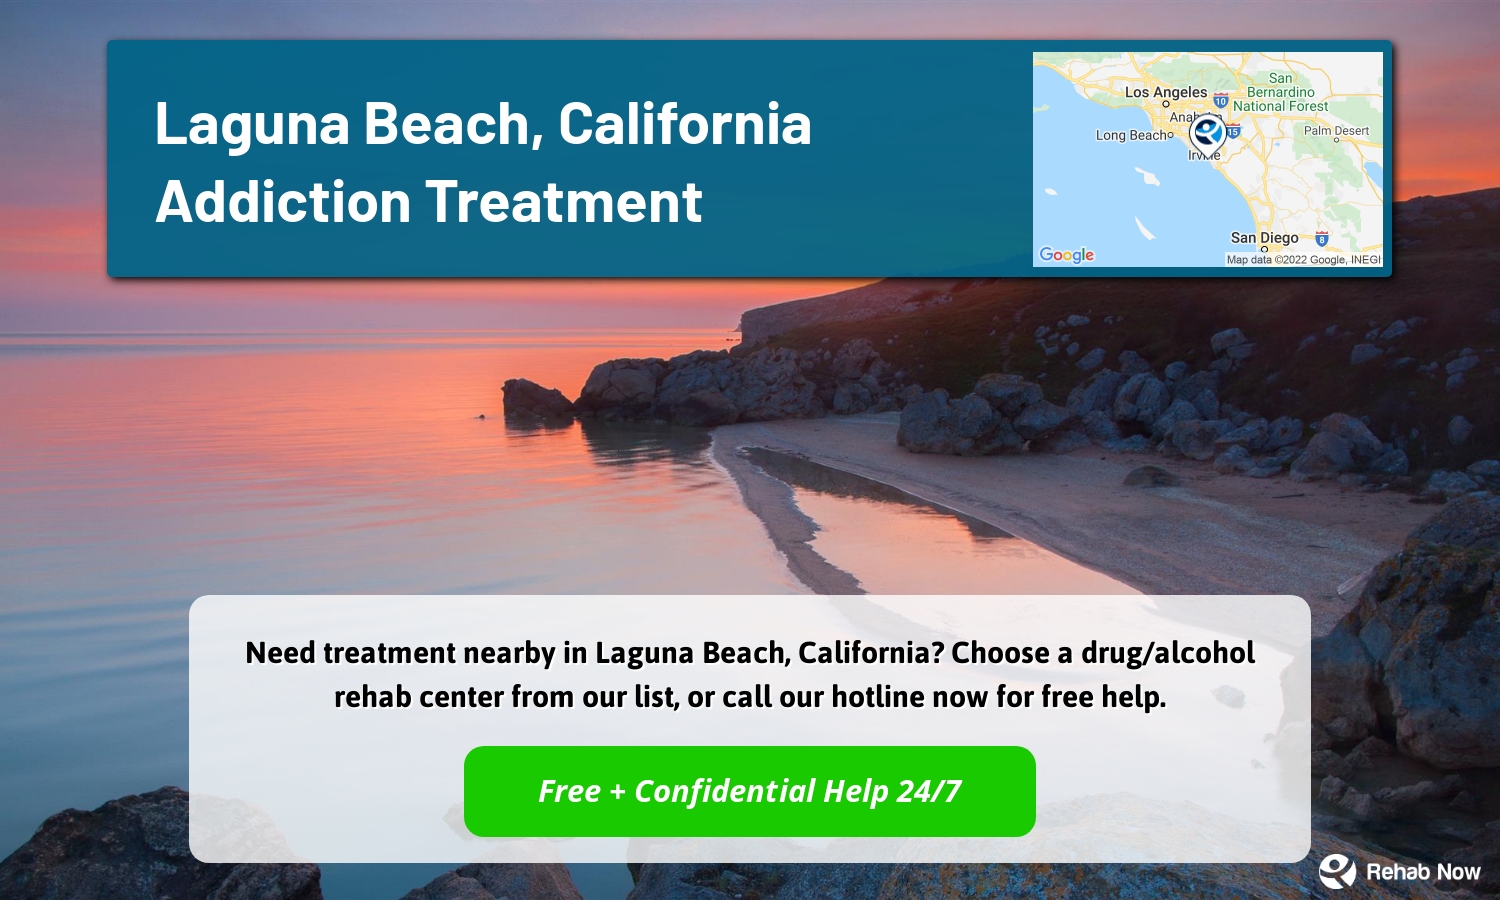 Need treatment nearby in Laguna Beach, California? Choose a drug/alcohol rehab center from our list, or call our hotline now for free help.